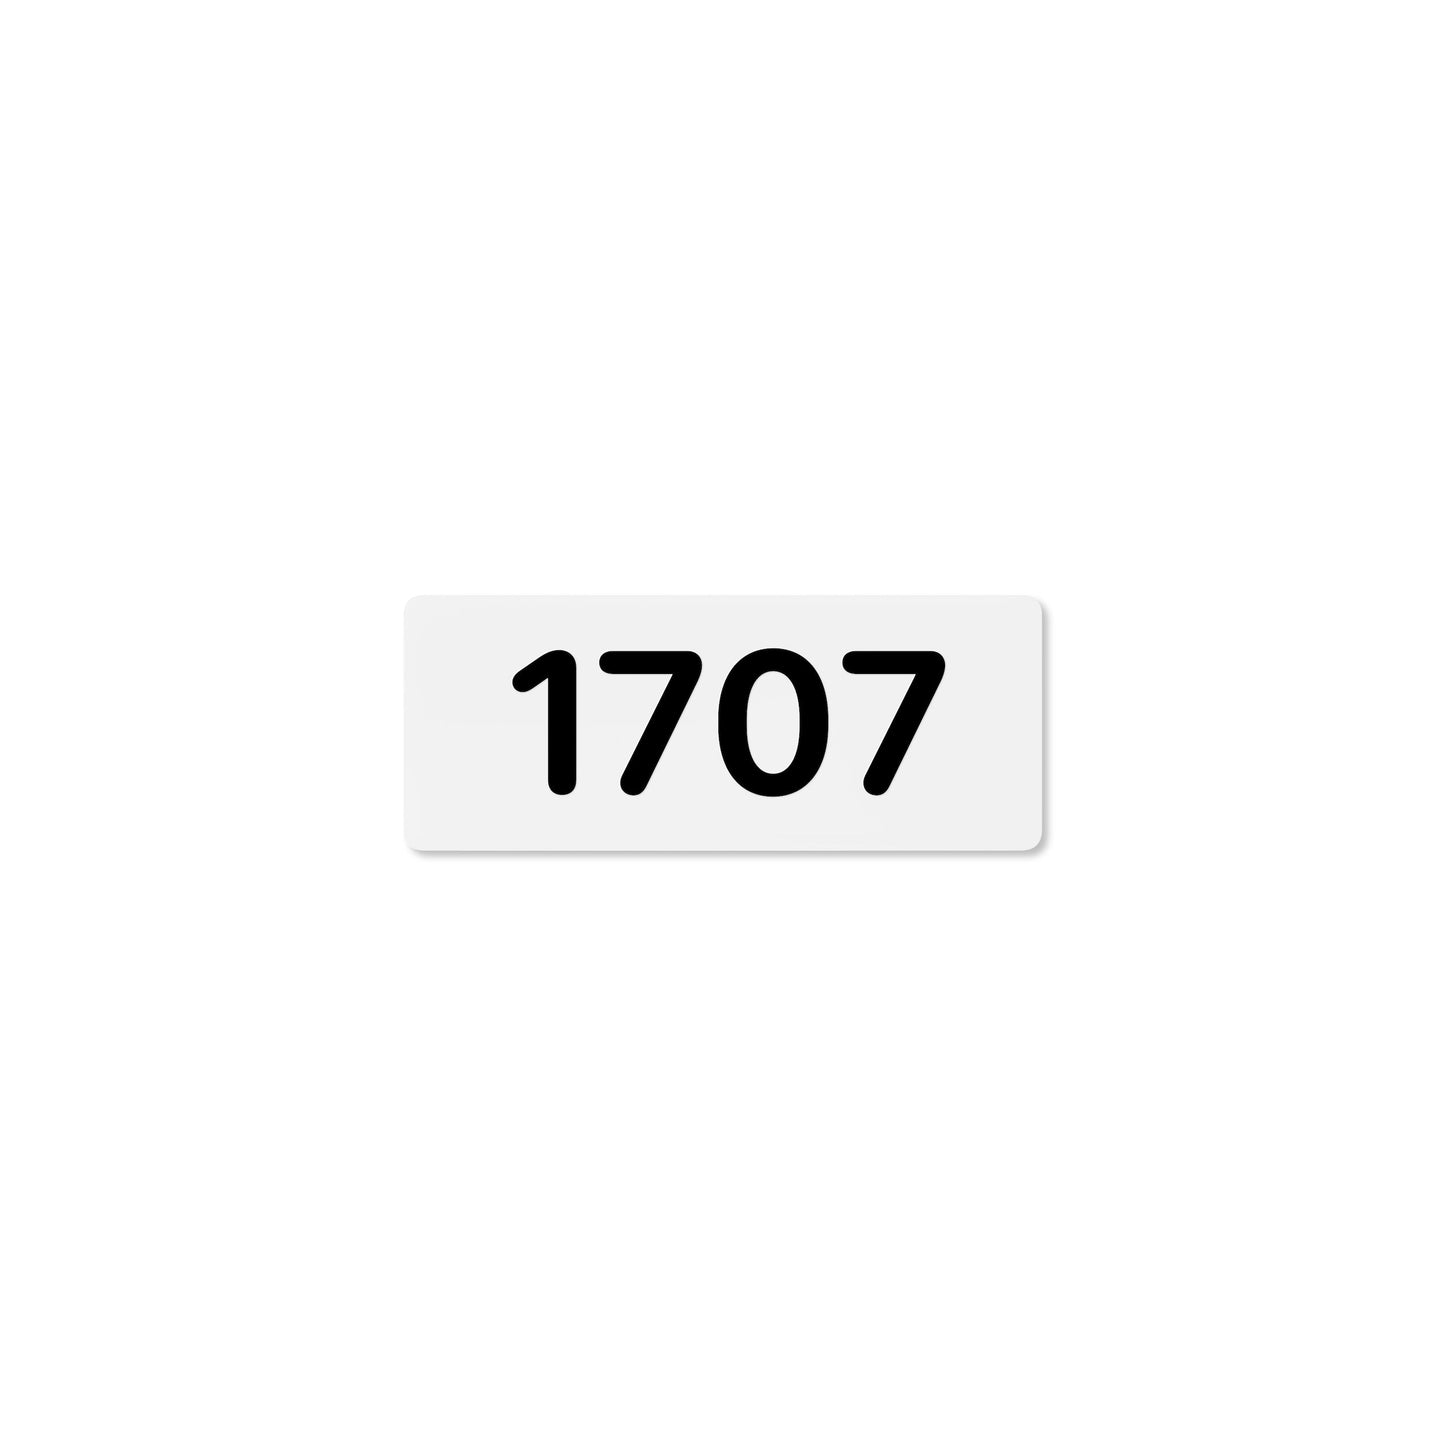 Numeral 1707